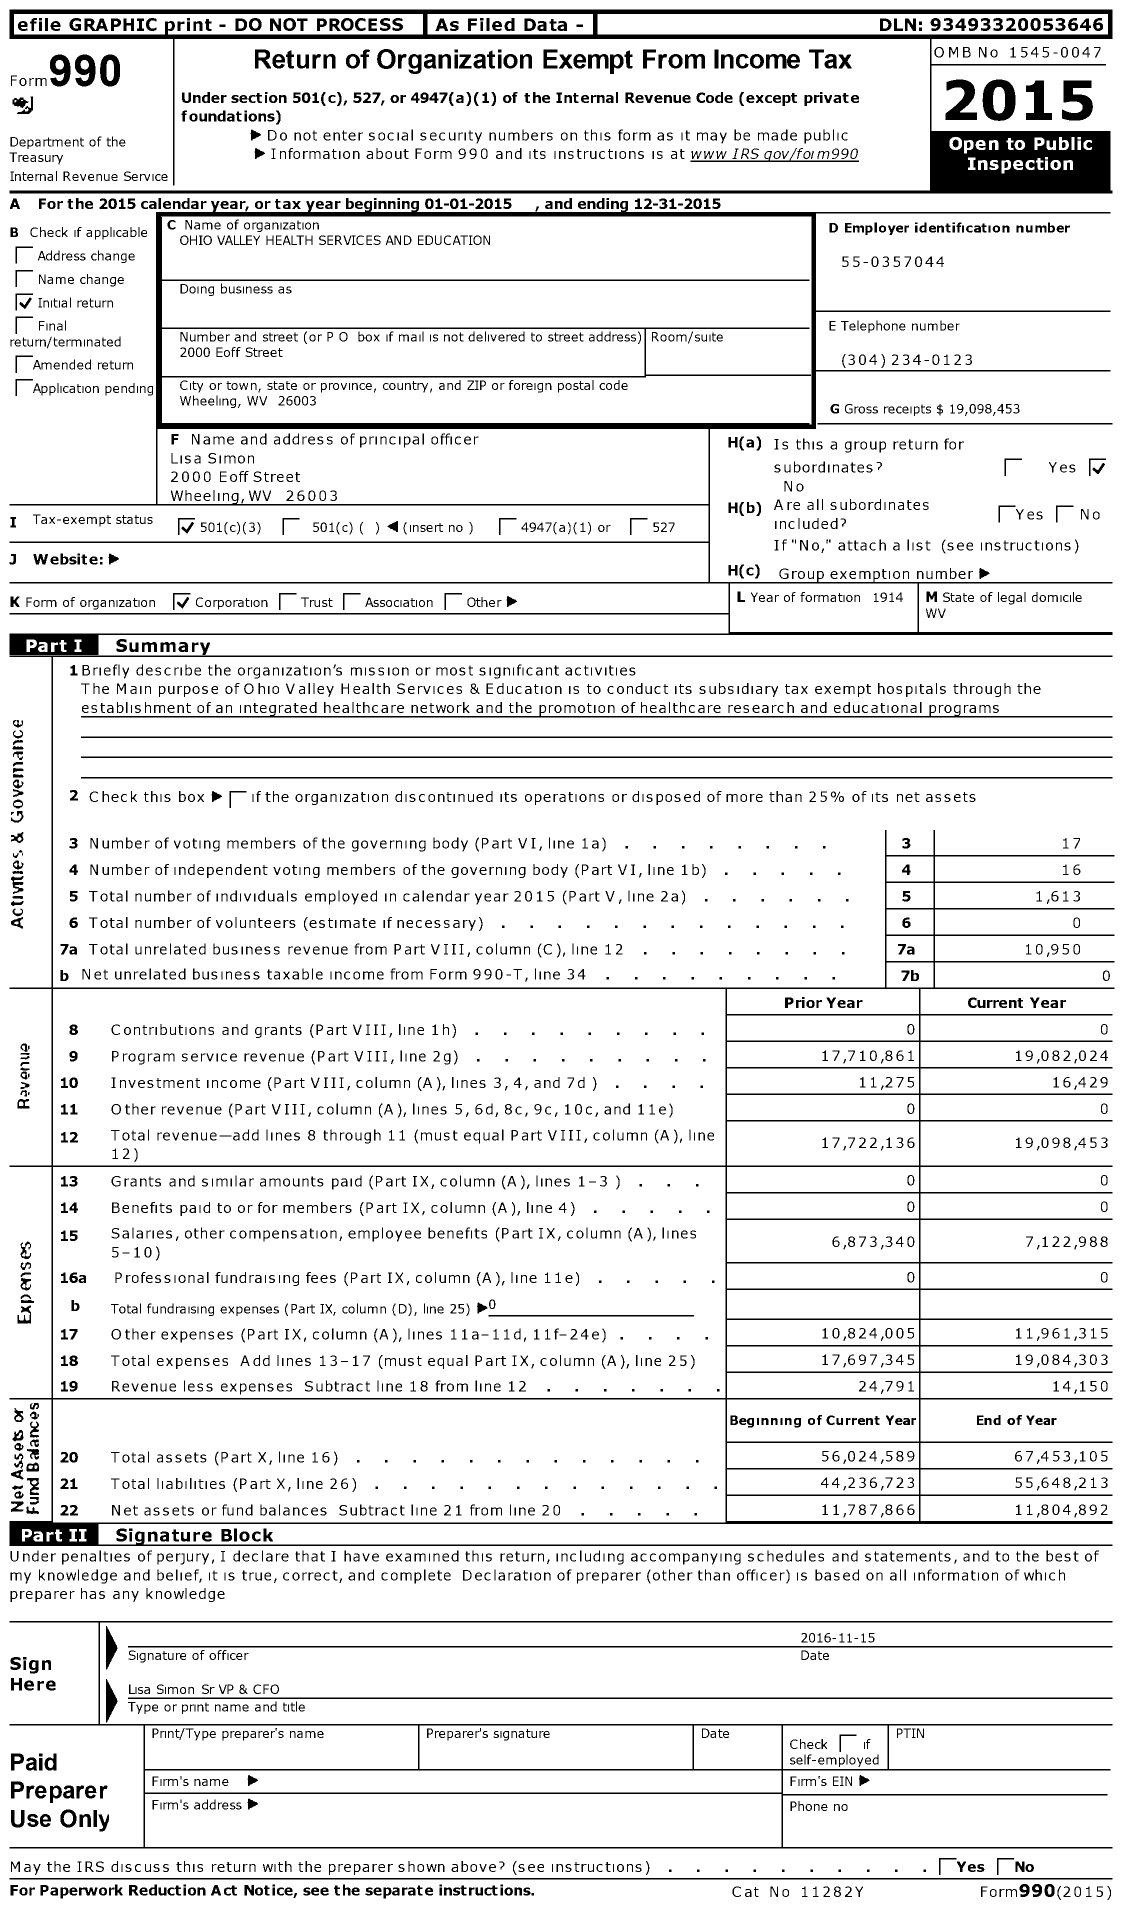 Image of first page of 2015 Form 990 for Ohio Valley Health Services & Education (OVHSE)